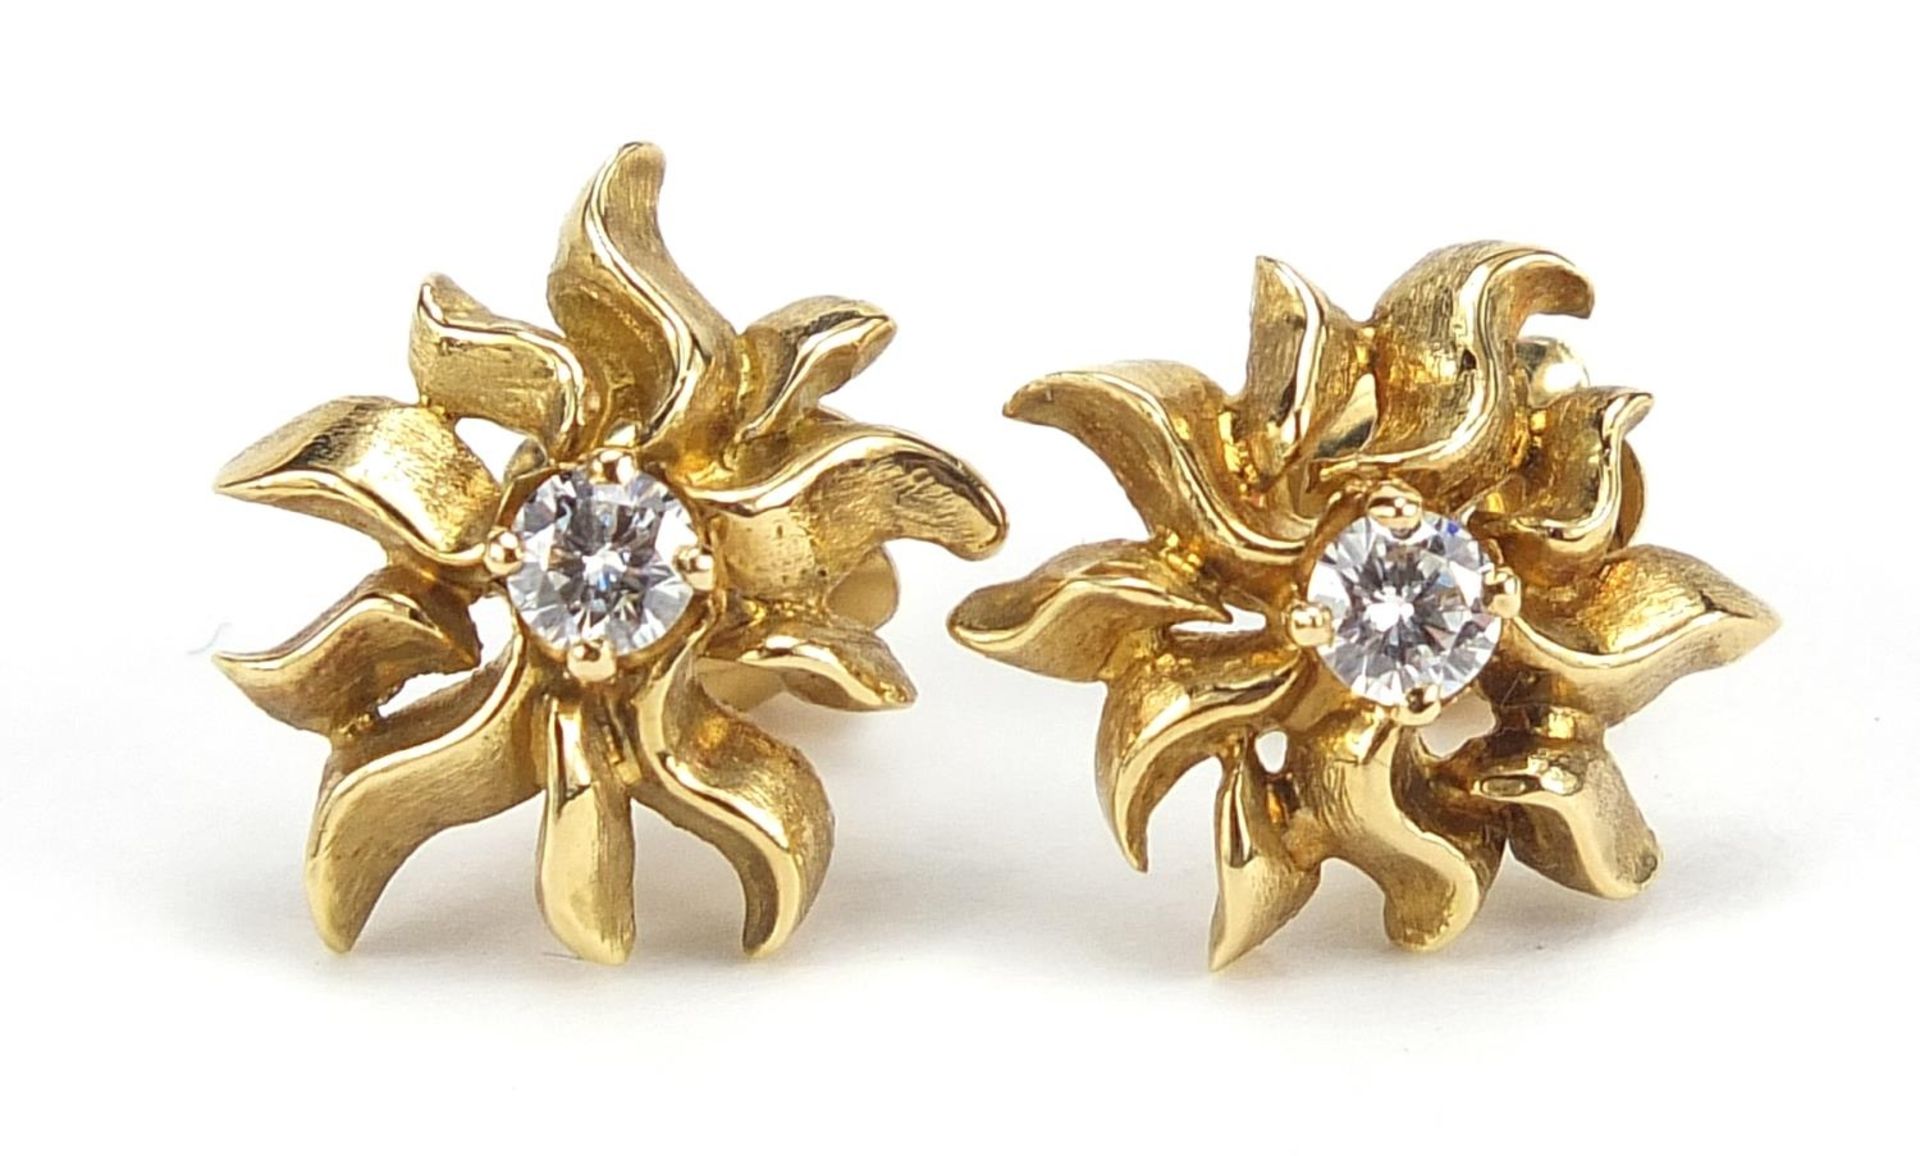 John Donald, pair of Modernist 18ct gold diamond solitaire stud earrings housed in a John Donald